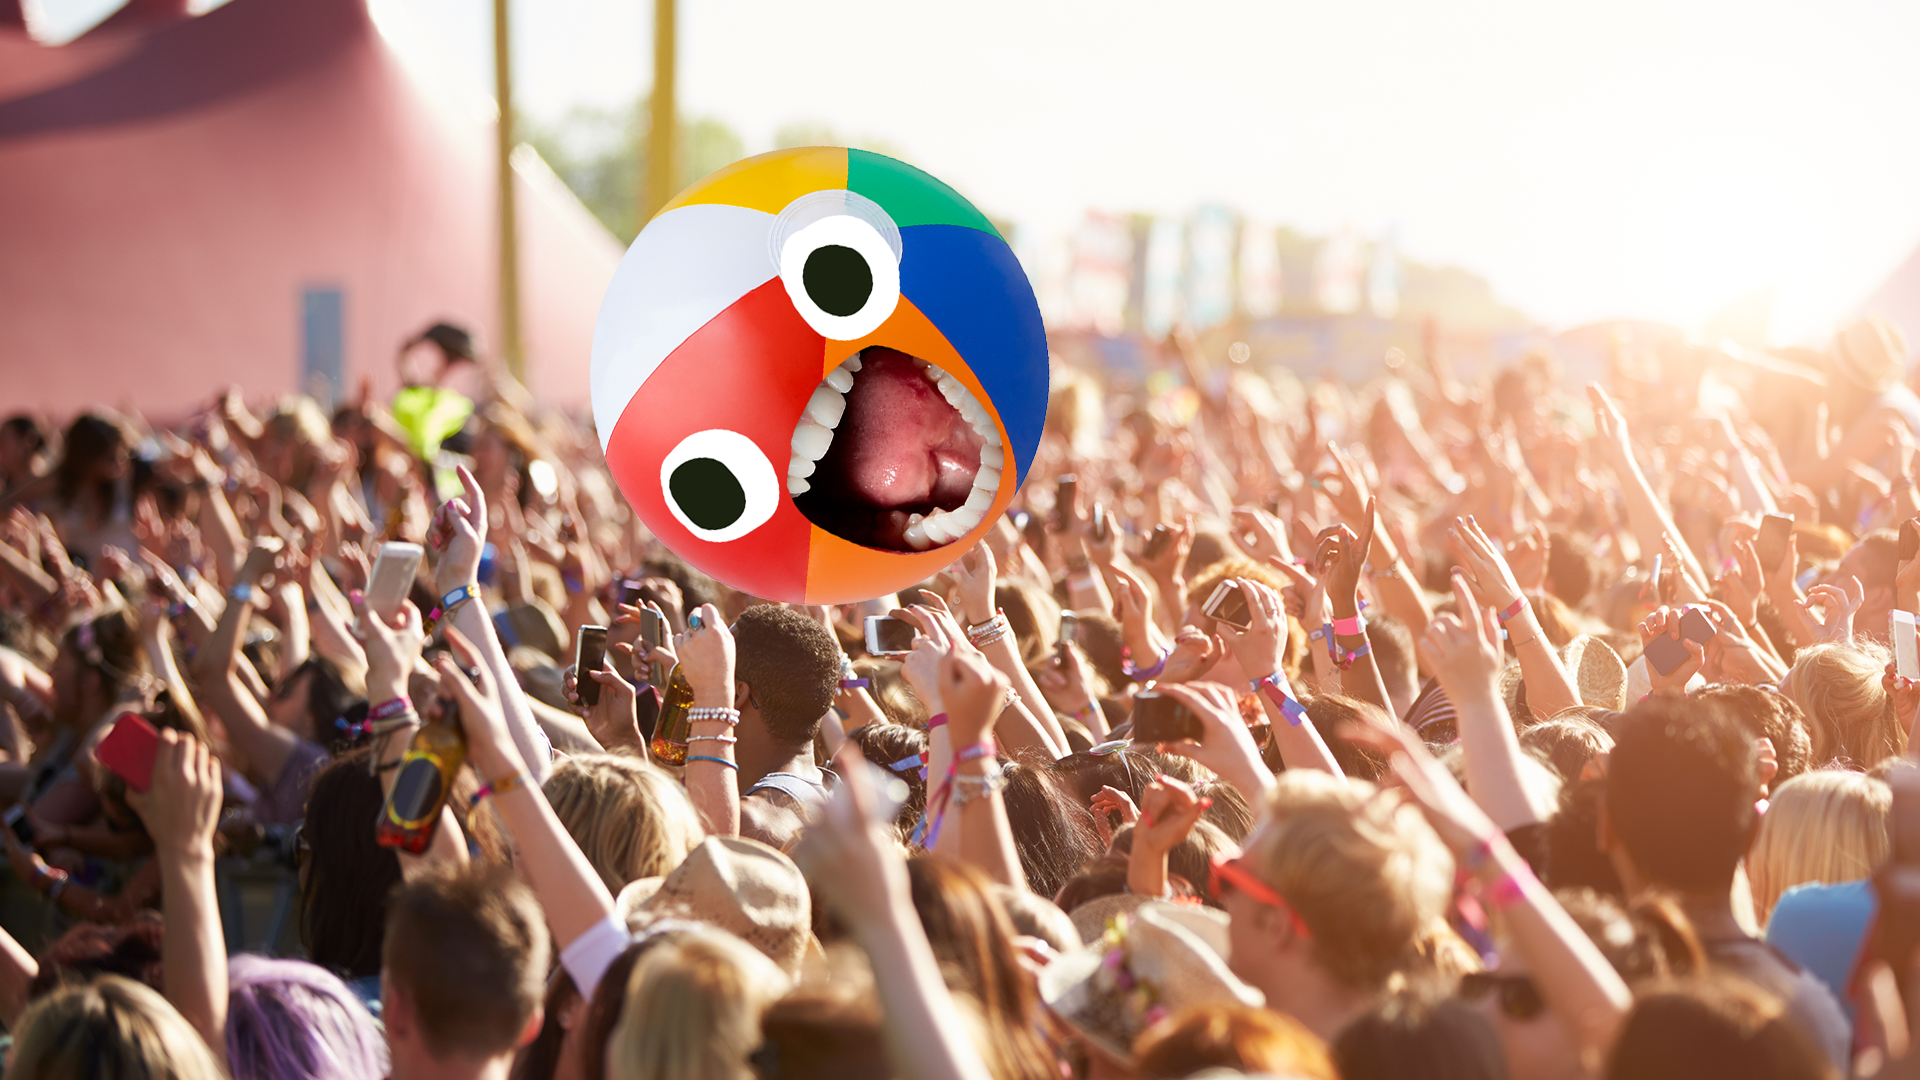 Screaming ball and festival crowd